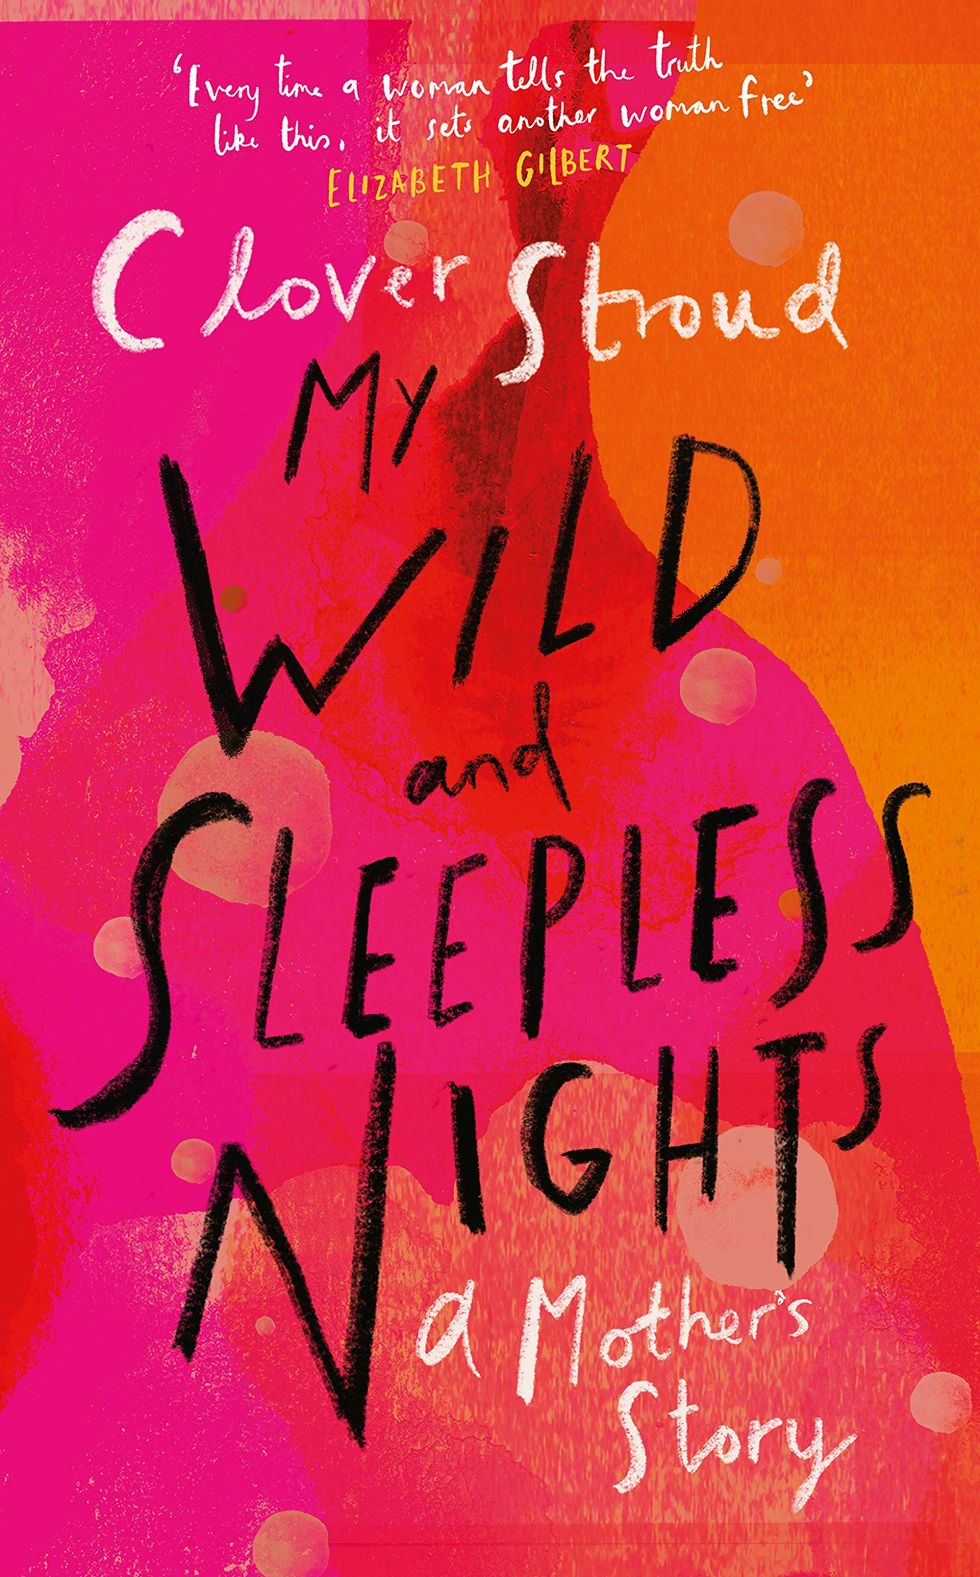 My Wild and Sleepless Nights by Clover Stroud